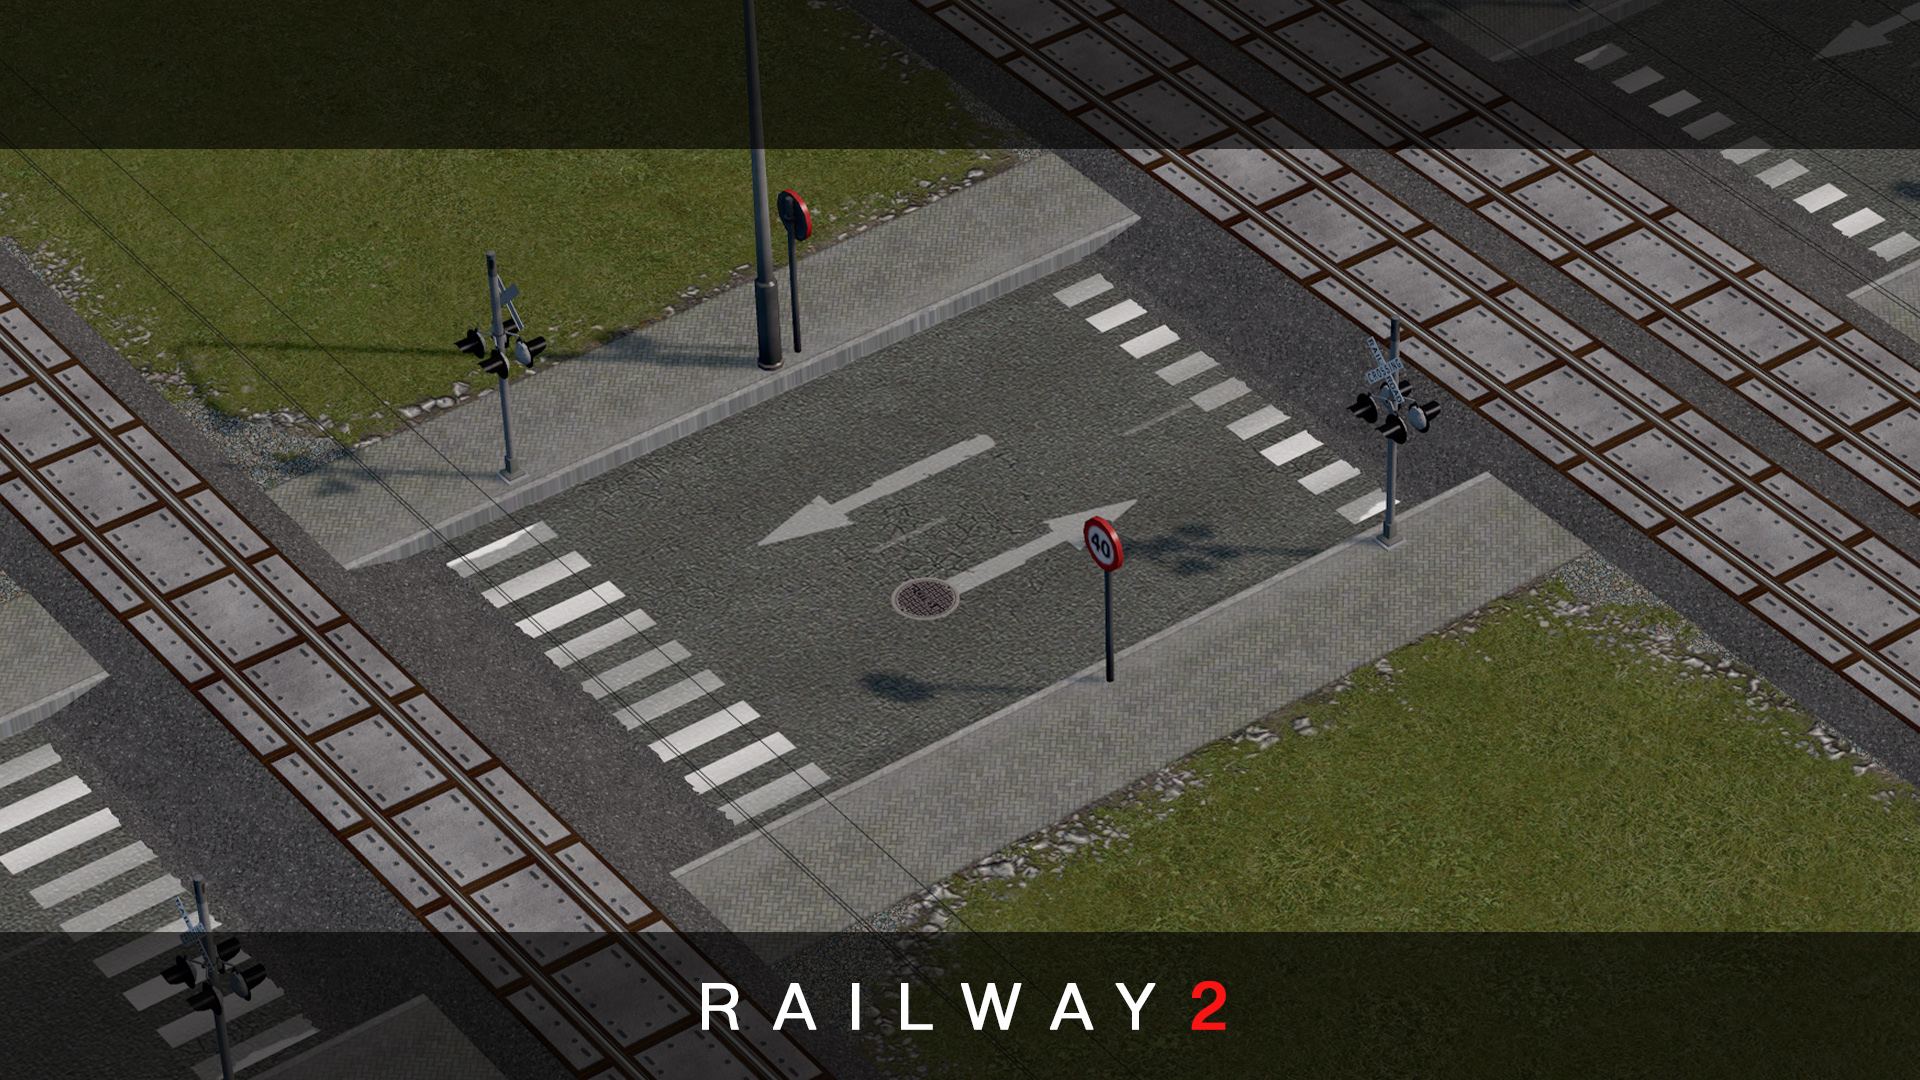 Cities: Skylines List of Railway 2 + Features + Modding Tutorial Information - 4.1 Networks: Core Features - 634B493